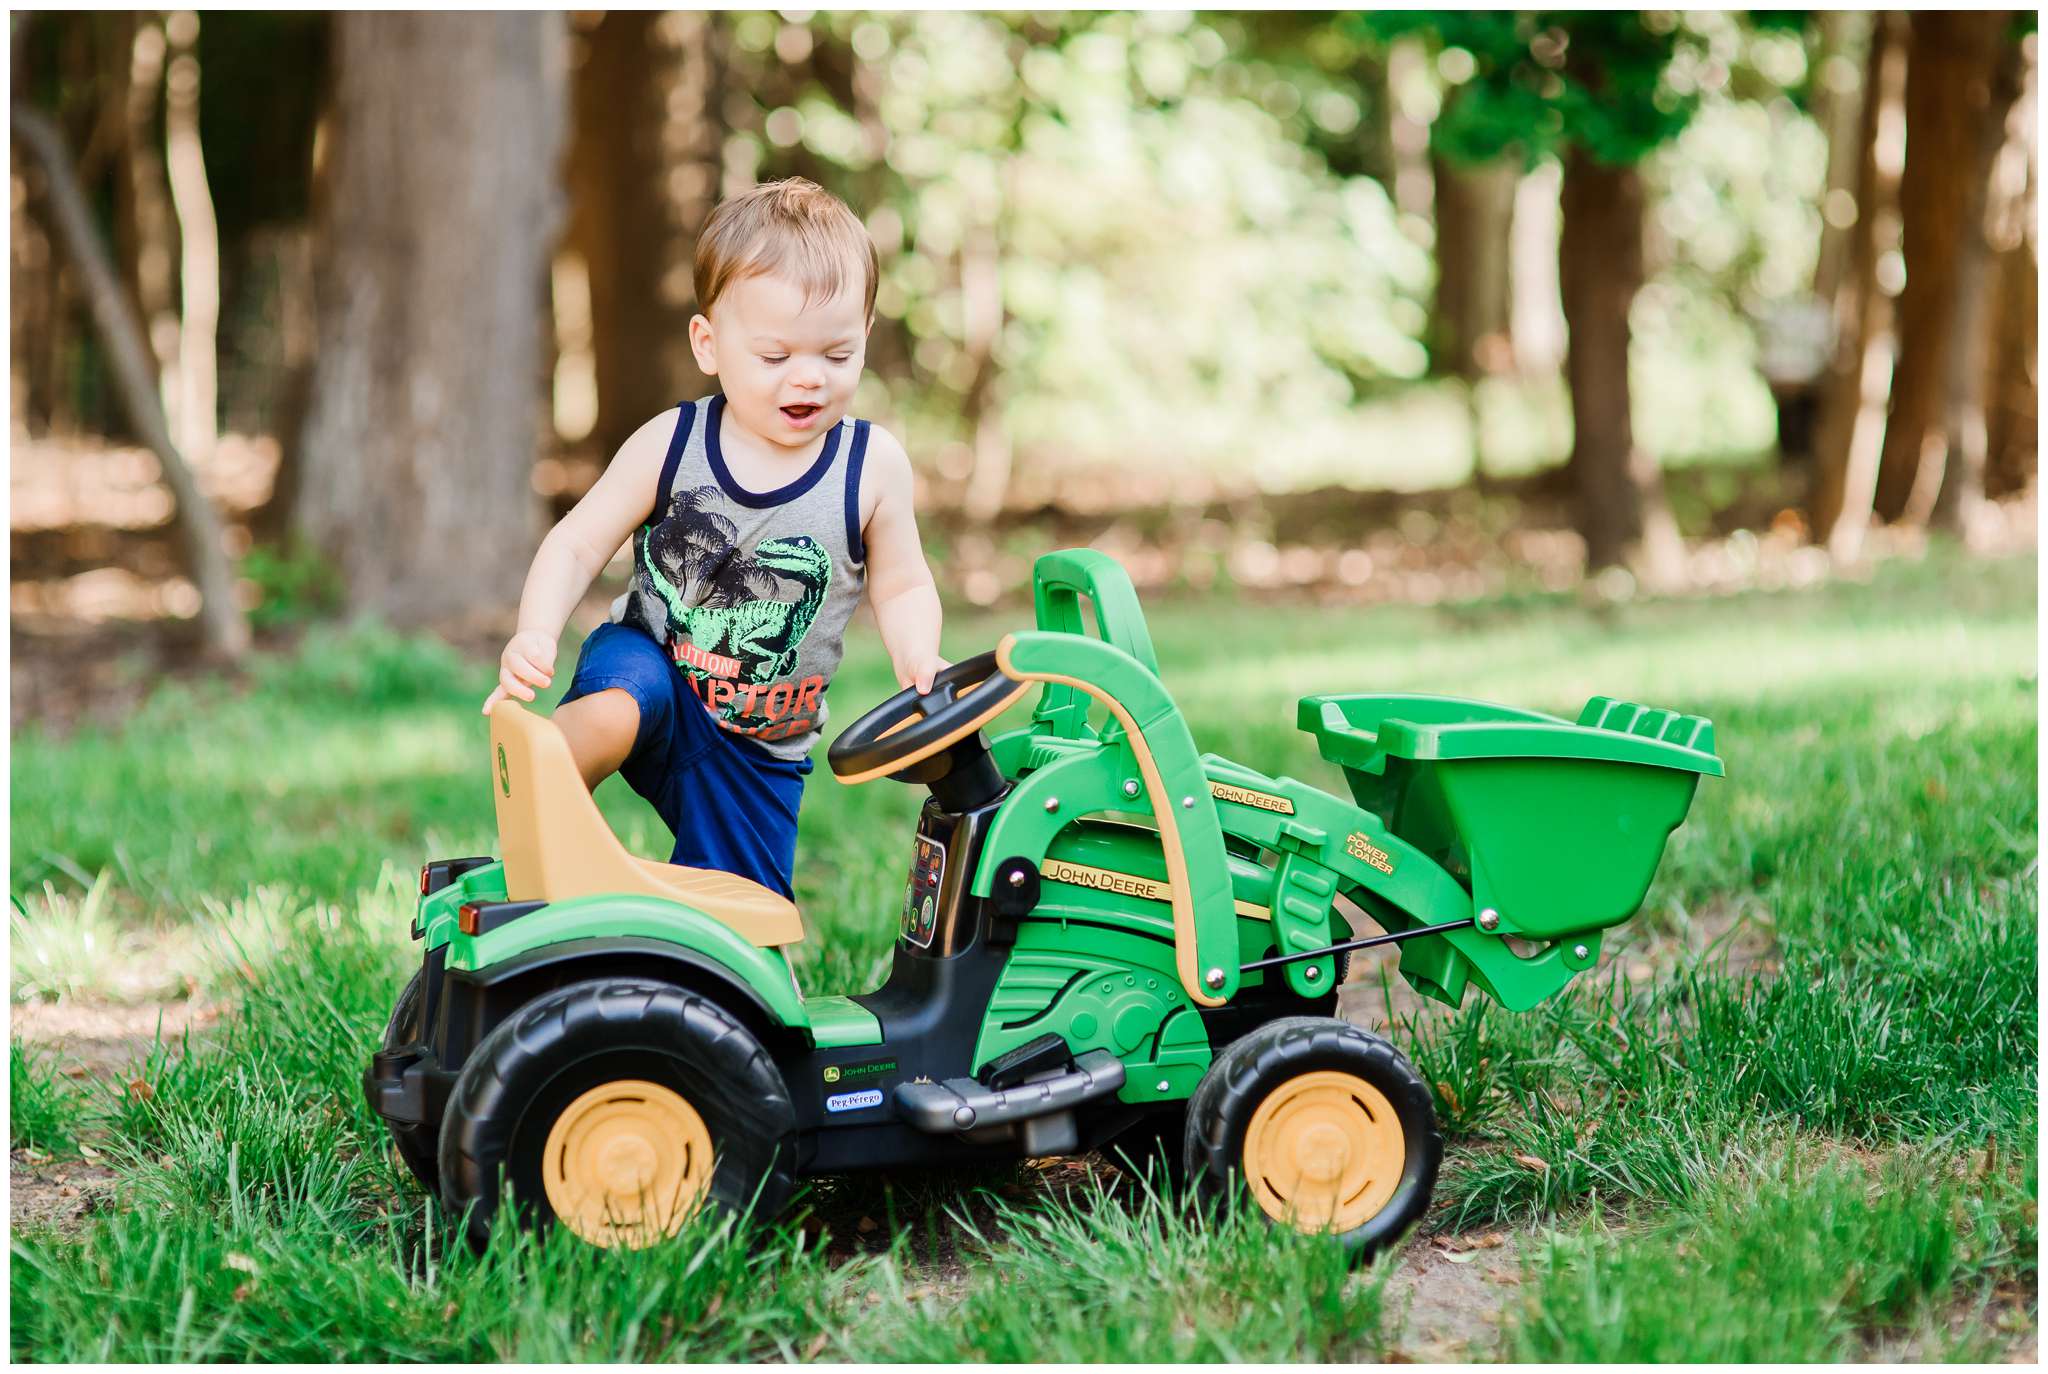 Liam and Tractor_4009.jpg